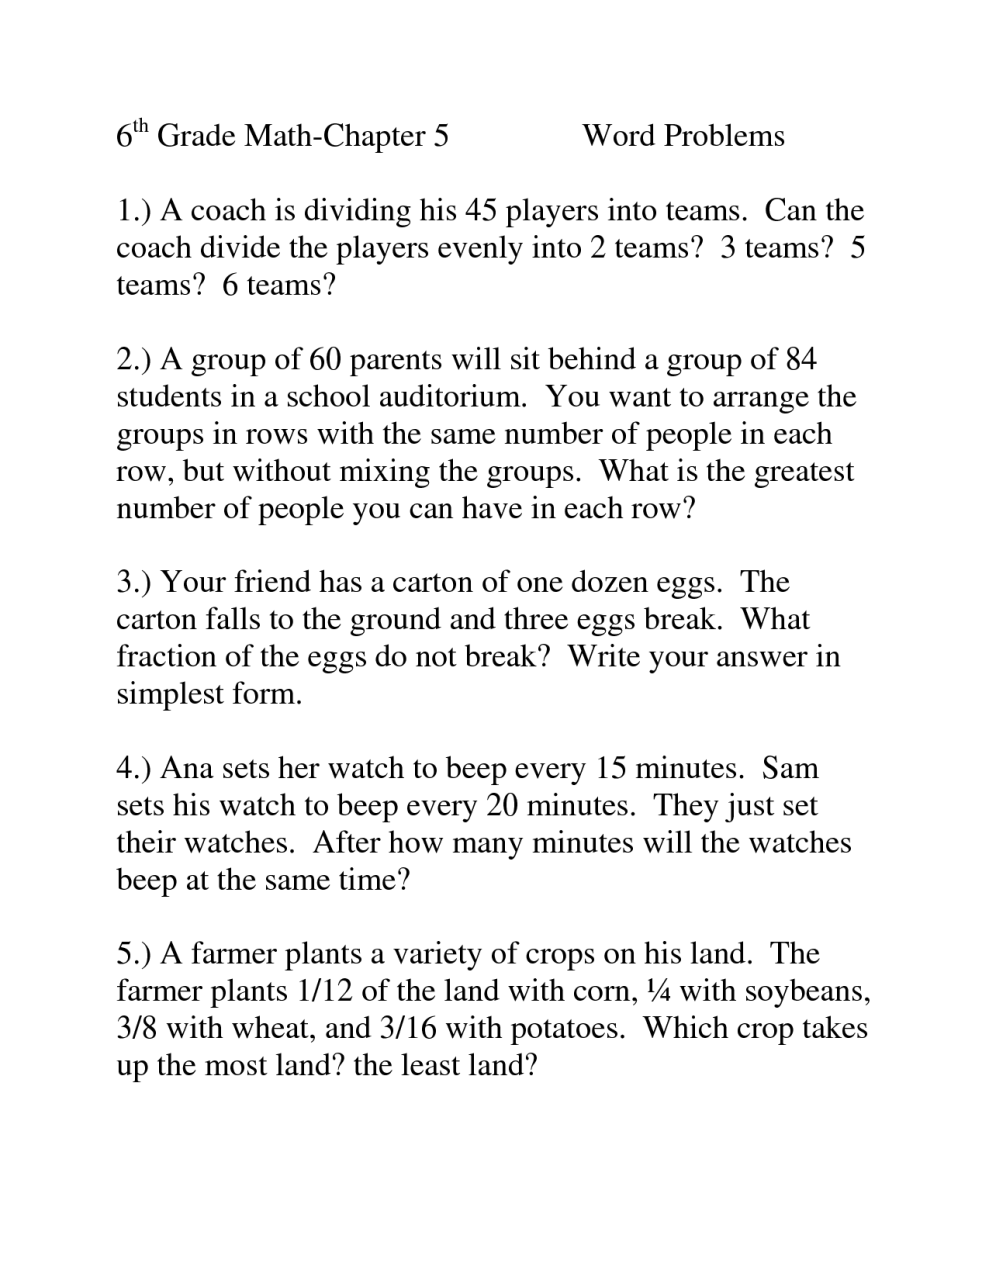 Fractions Worksheets 6th Grade Math Word Problems. Fractions. Best Free